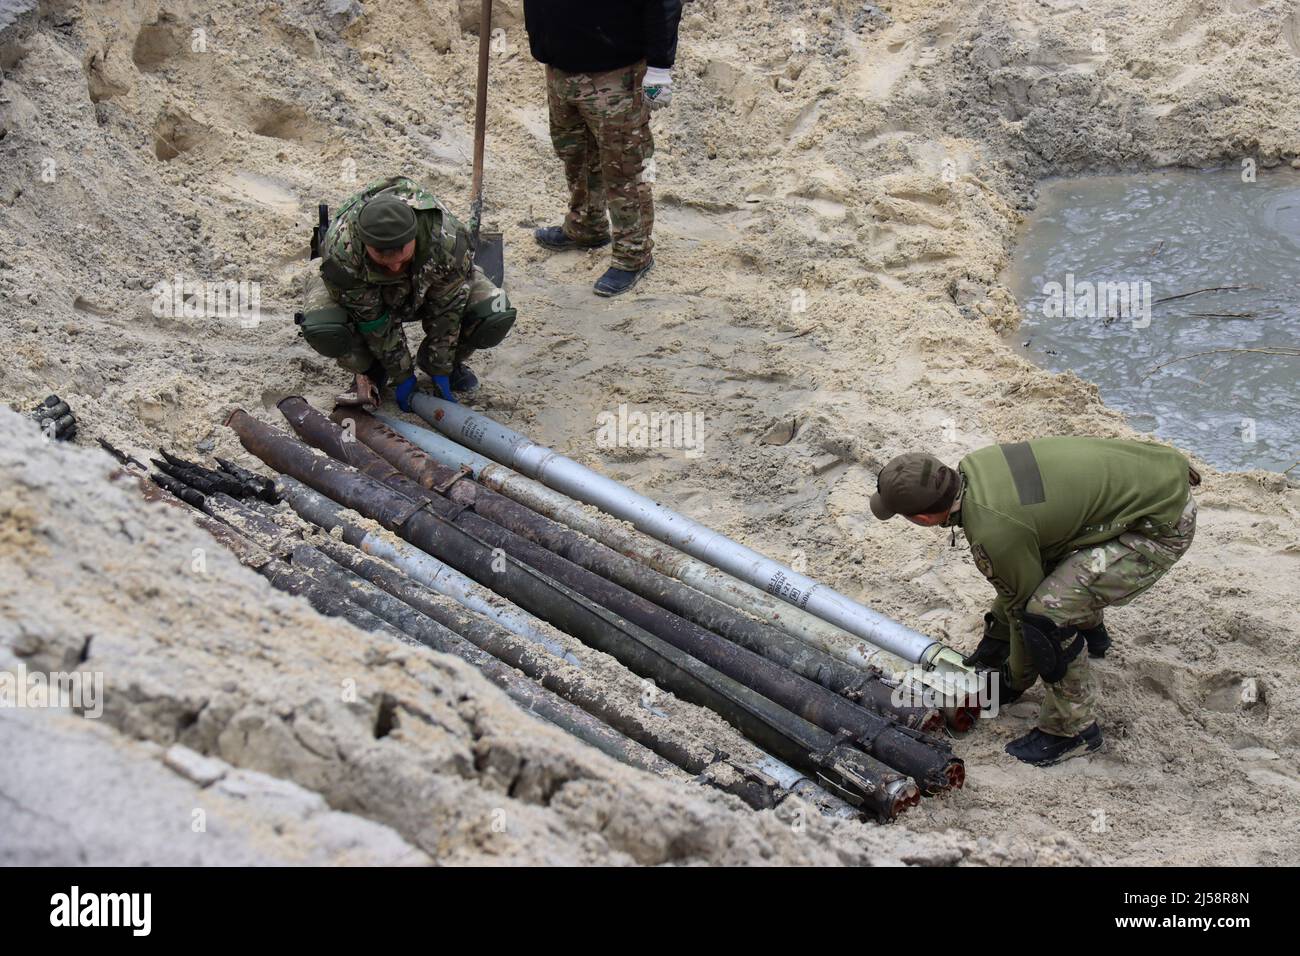 KYIV REGION, UKRAINE - APRIL 20, 2022 - Servicemen arrange the shells on the ground as they work to dispose of ammunition collected in the territories Stock Photo